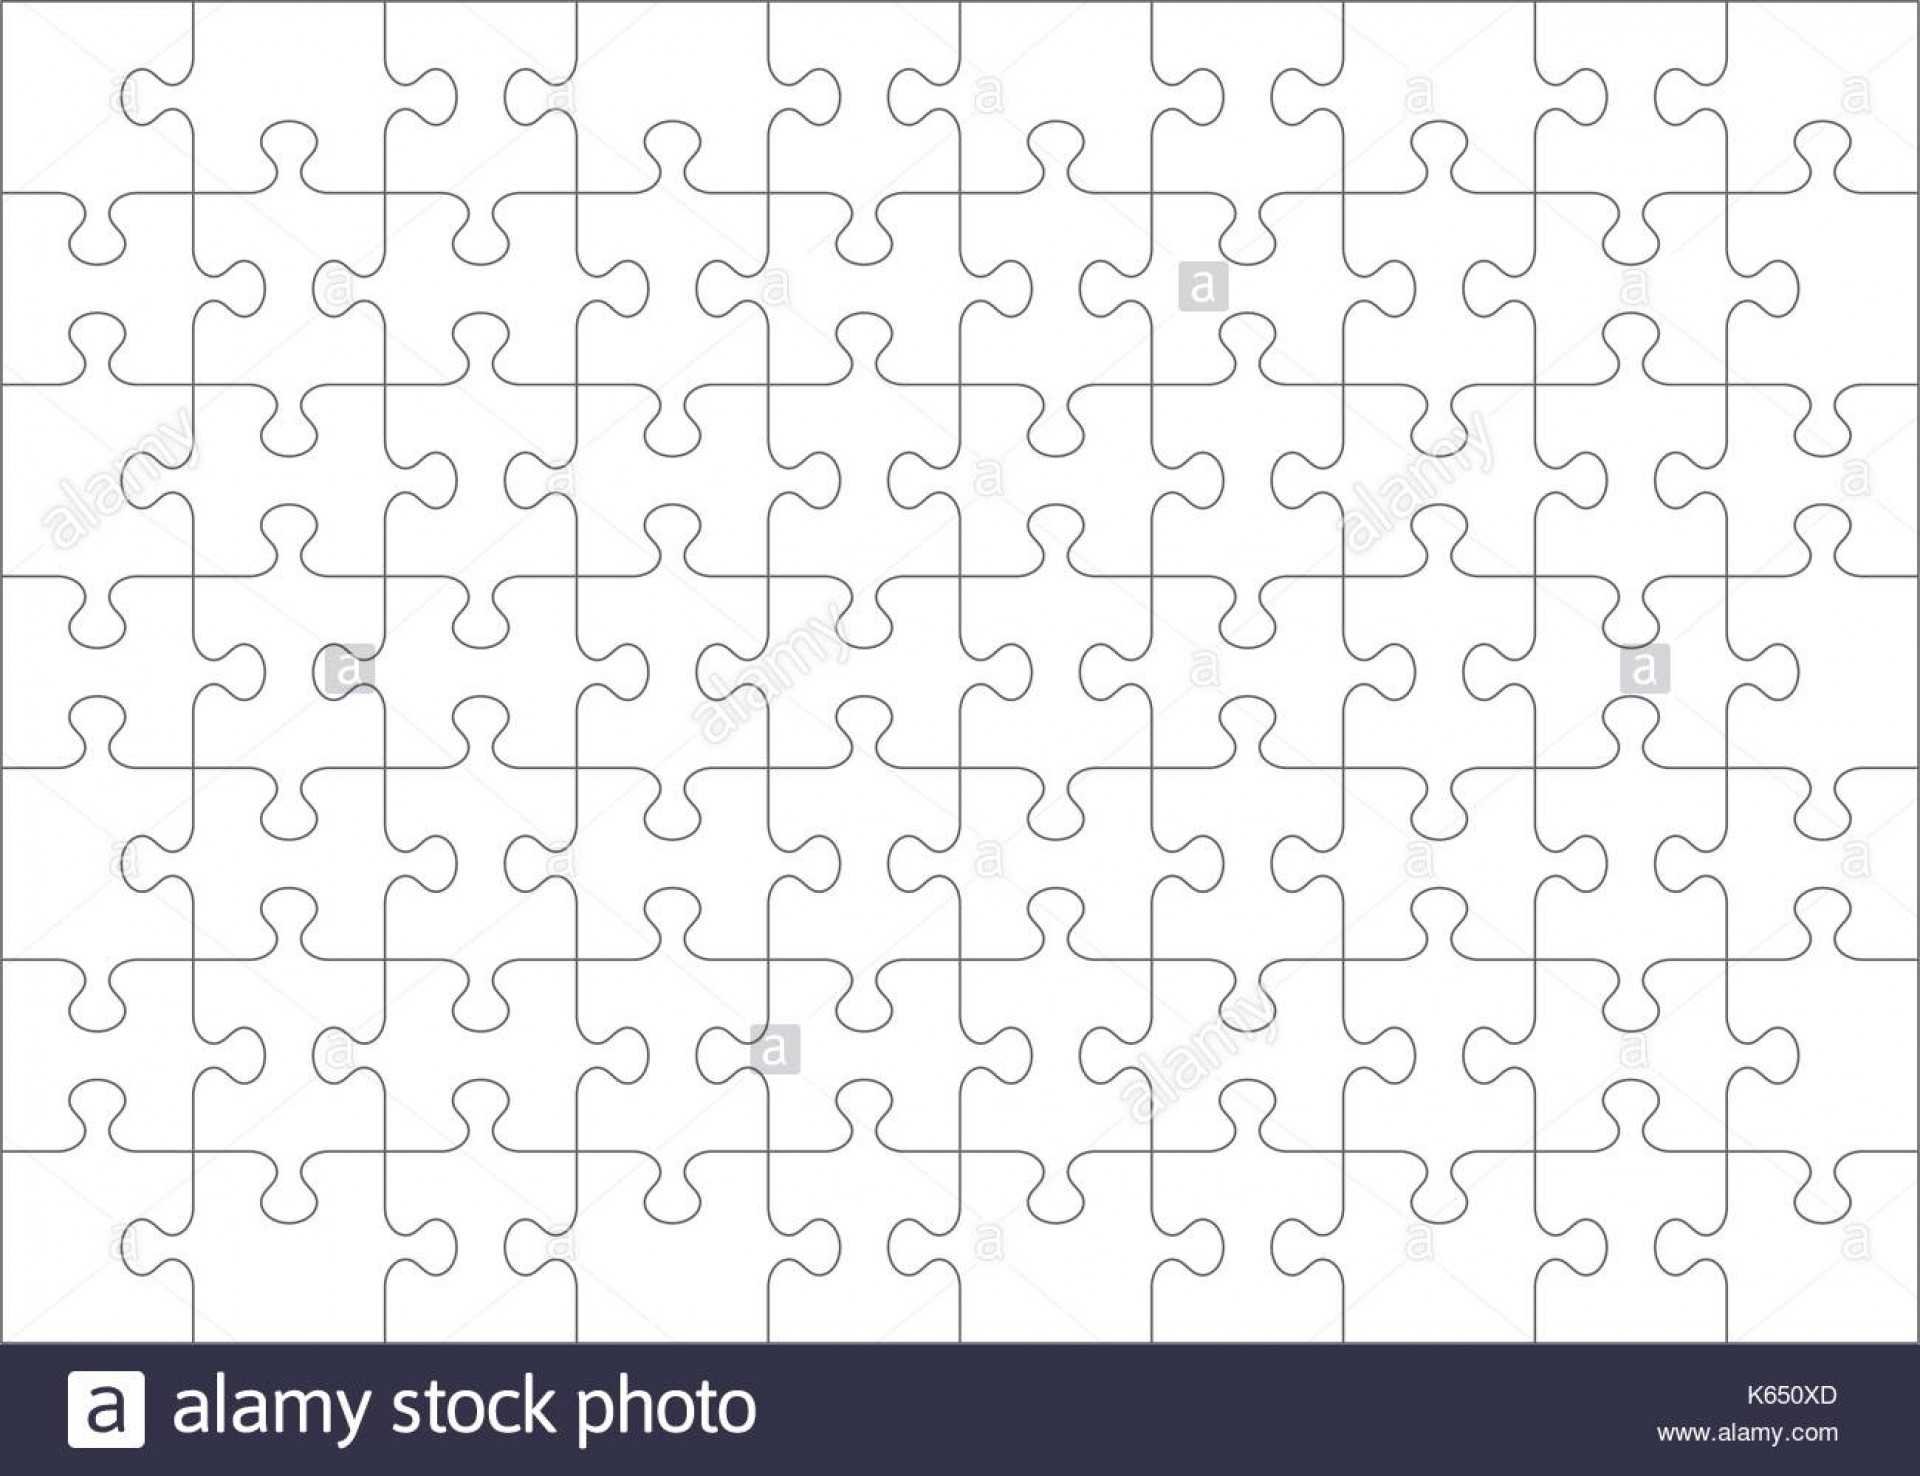 030 Puzzle Pieces Template For Word Best Of Piece Intended Pertaining To Jigsaw Puzzle Template For Word